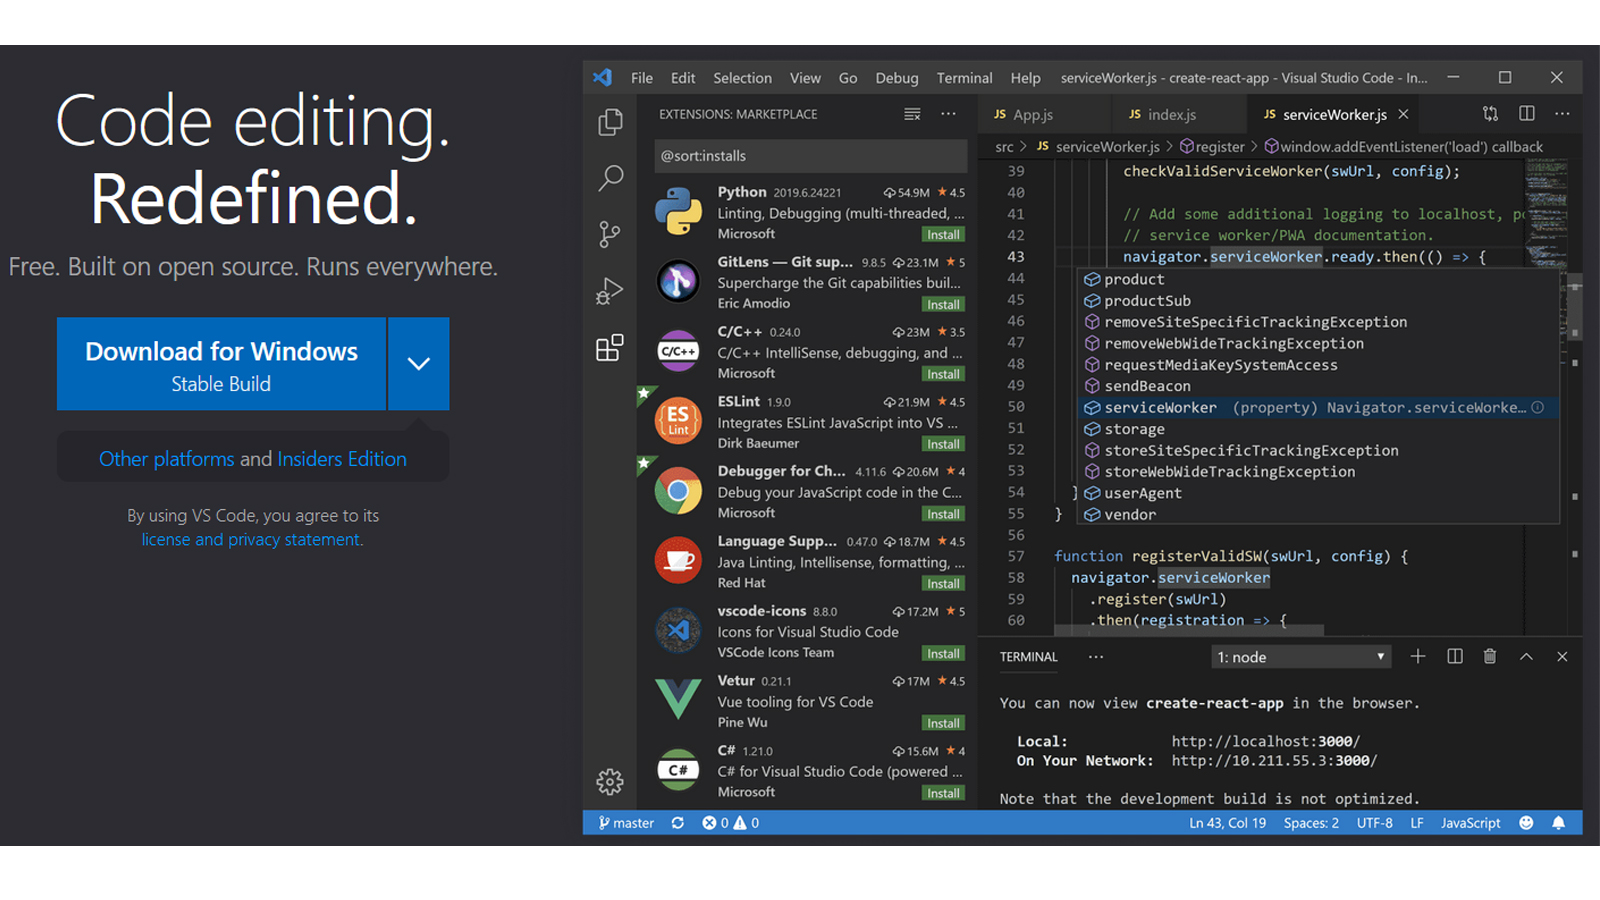 Find detailed information about VSCode